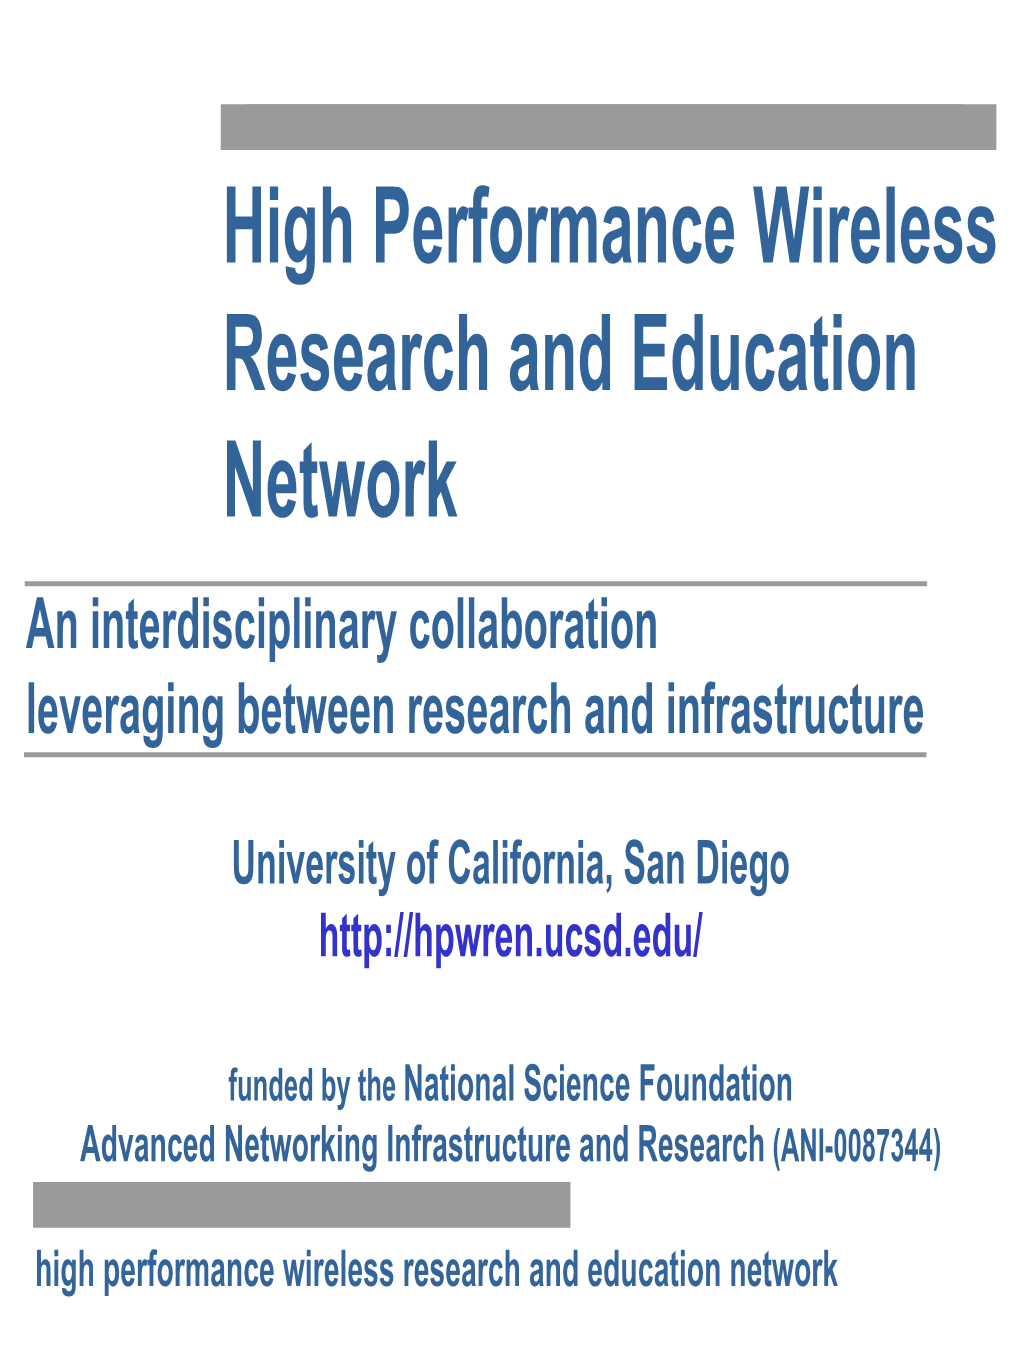 High Performance Wireless Research and Education Network an Interdisciplinary Collaboration Leveraging Between Research and Infrastructure